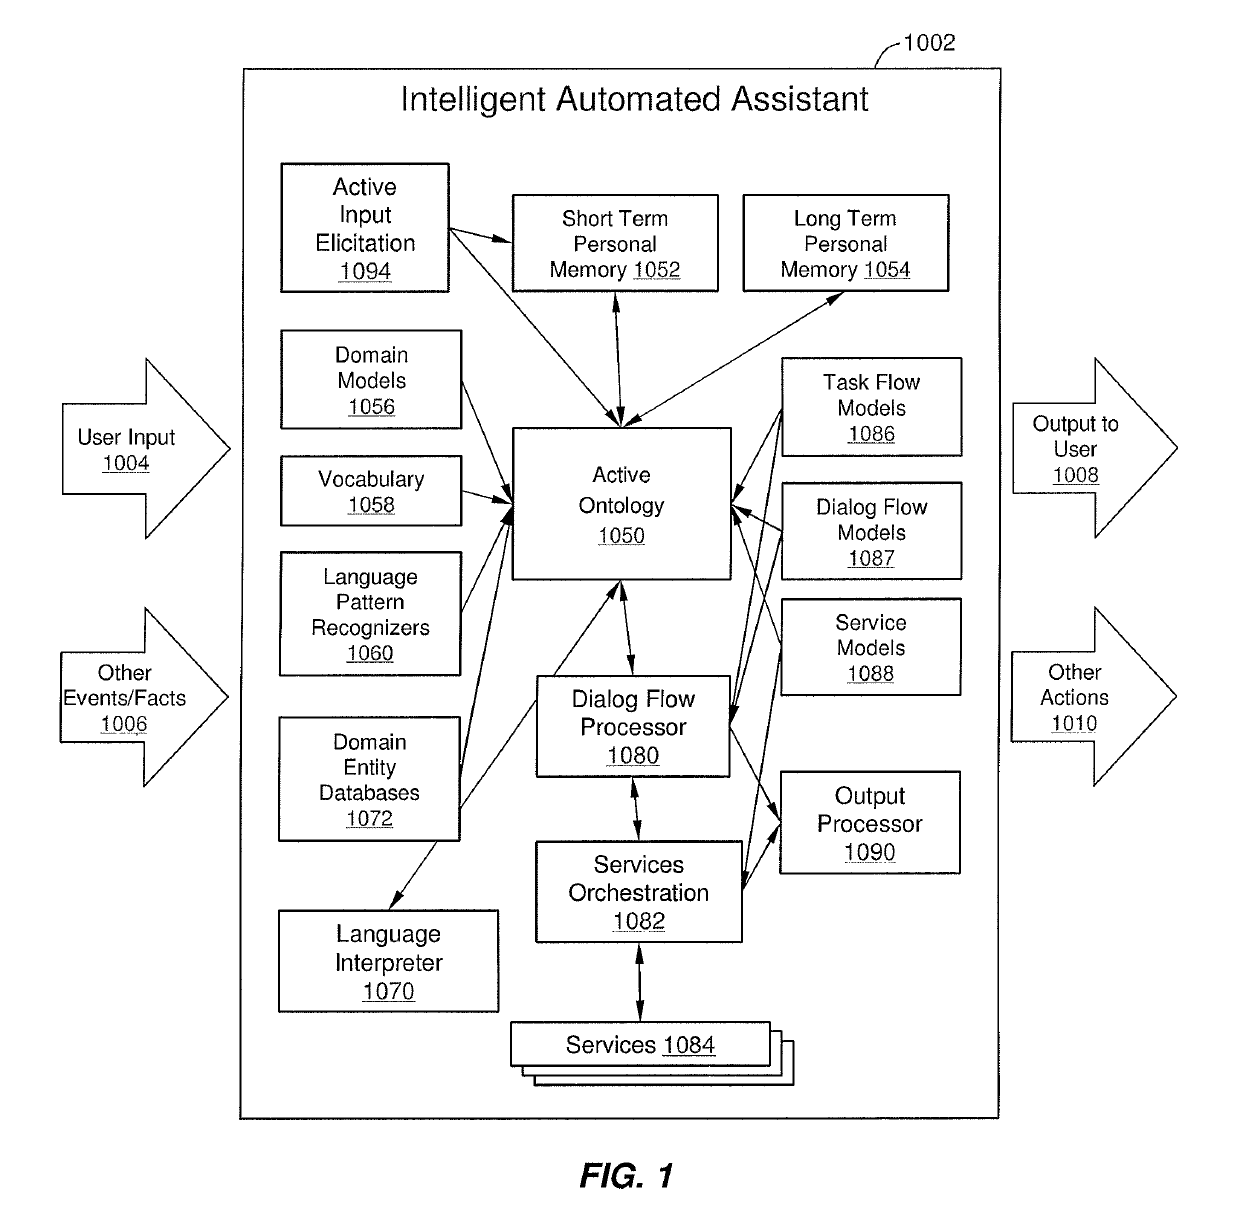 Intelligent automated assistant